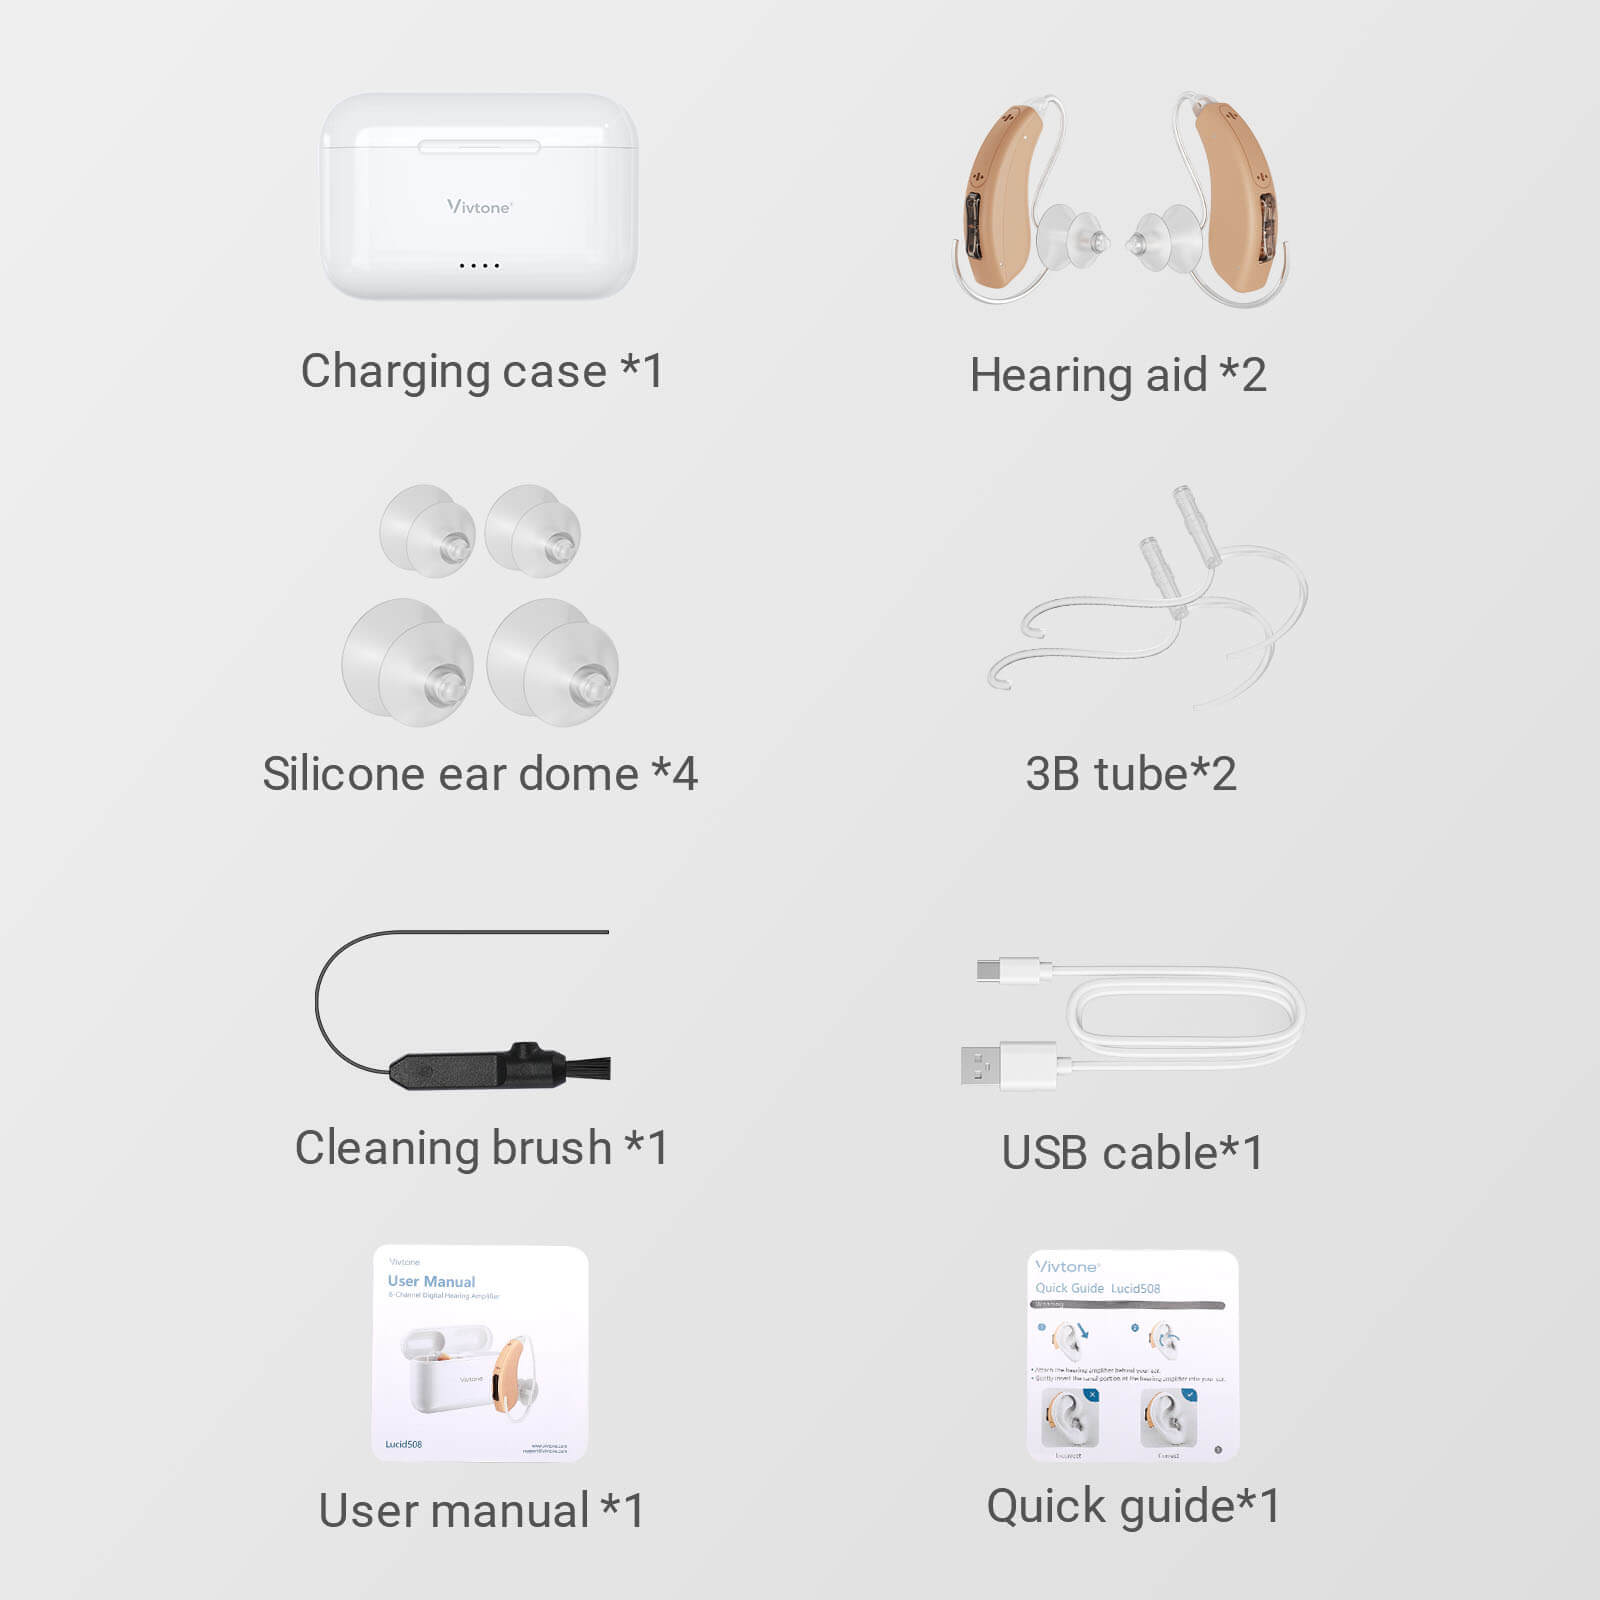 Advanced Hearing Aid Devices: The Best Hearing Aids for Tinnitus Relief in 2023-Vivtone Lucid508d